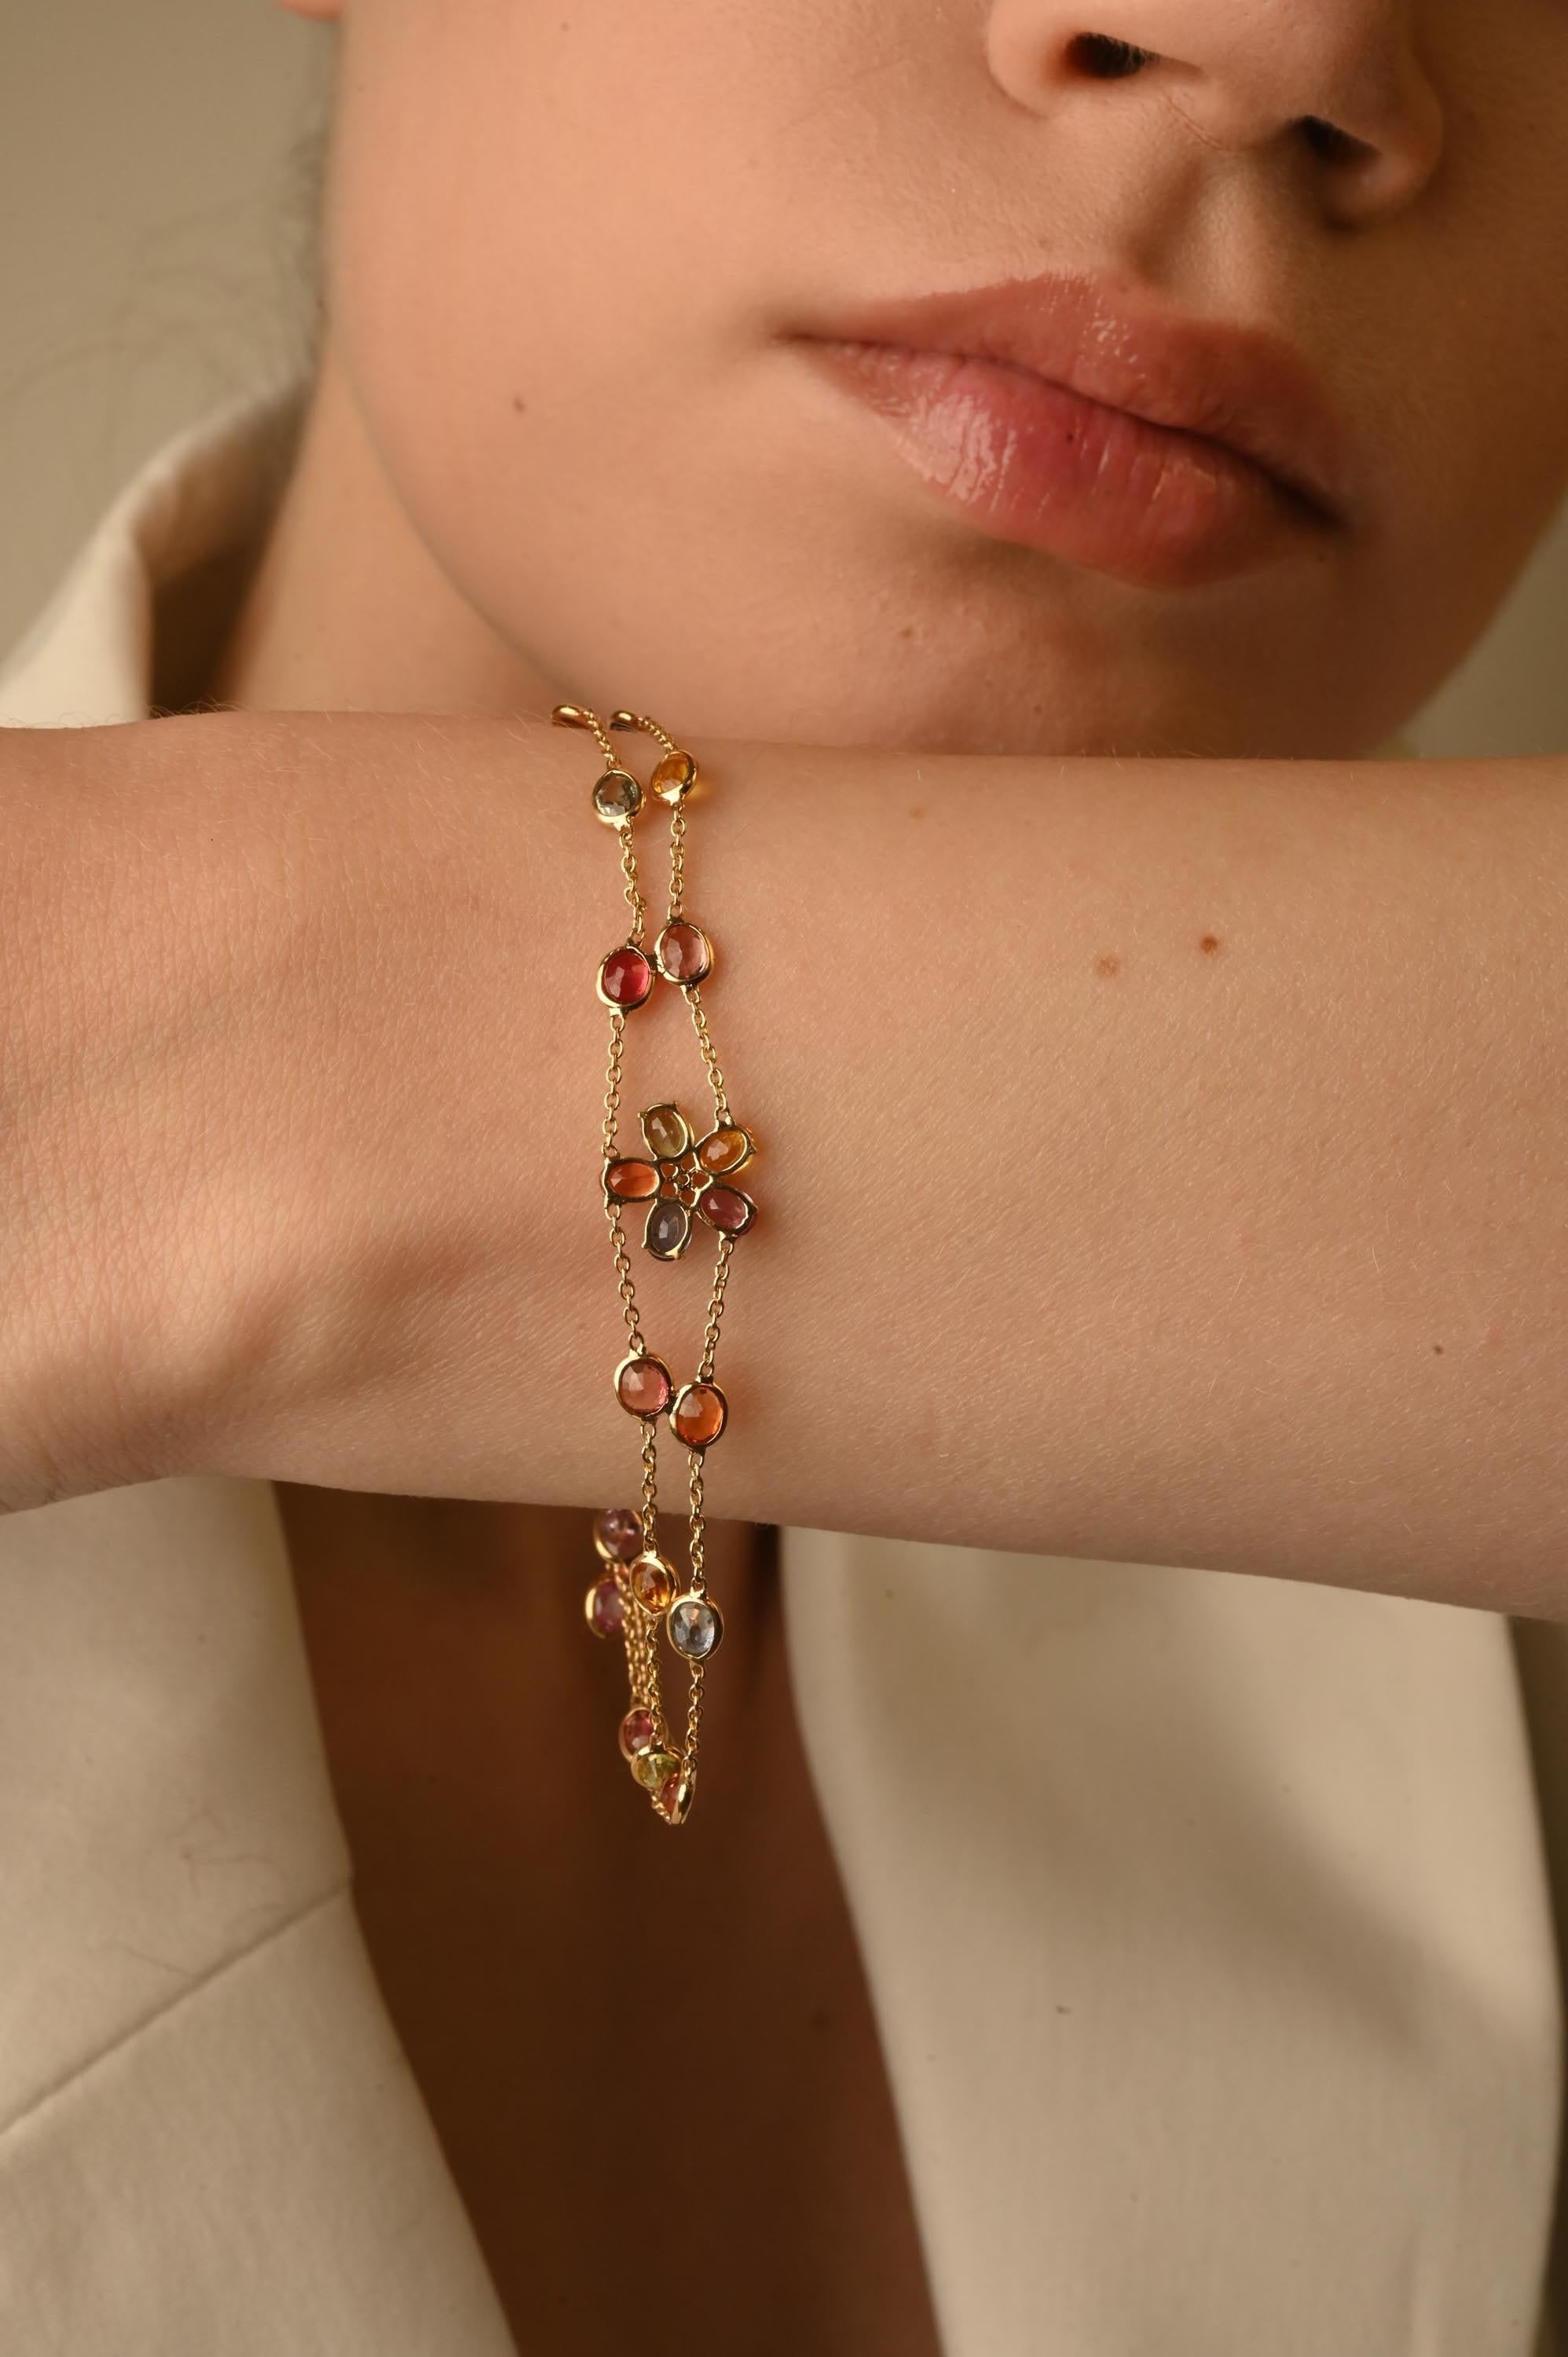 Dainty Flower Multi Sapphire Double Chain Bracelet in 18K Gold with Diamonds . A gold gemstone bracelet is the ultimate statement piece for every stylish woman.
Adorn your wrist with this beautiful oval cut multi sapphire chain bracelet in 18 Karat